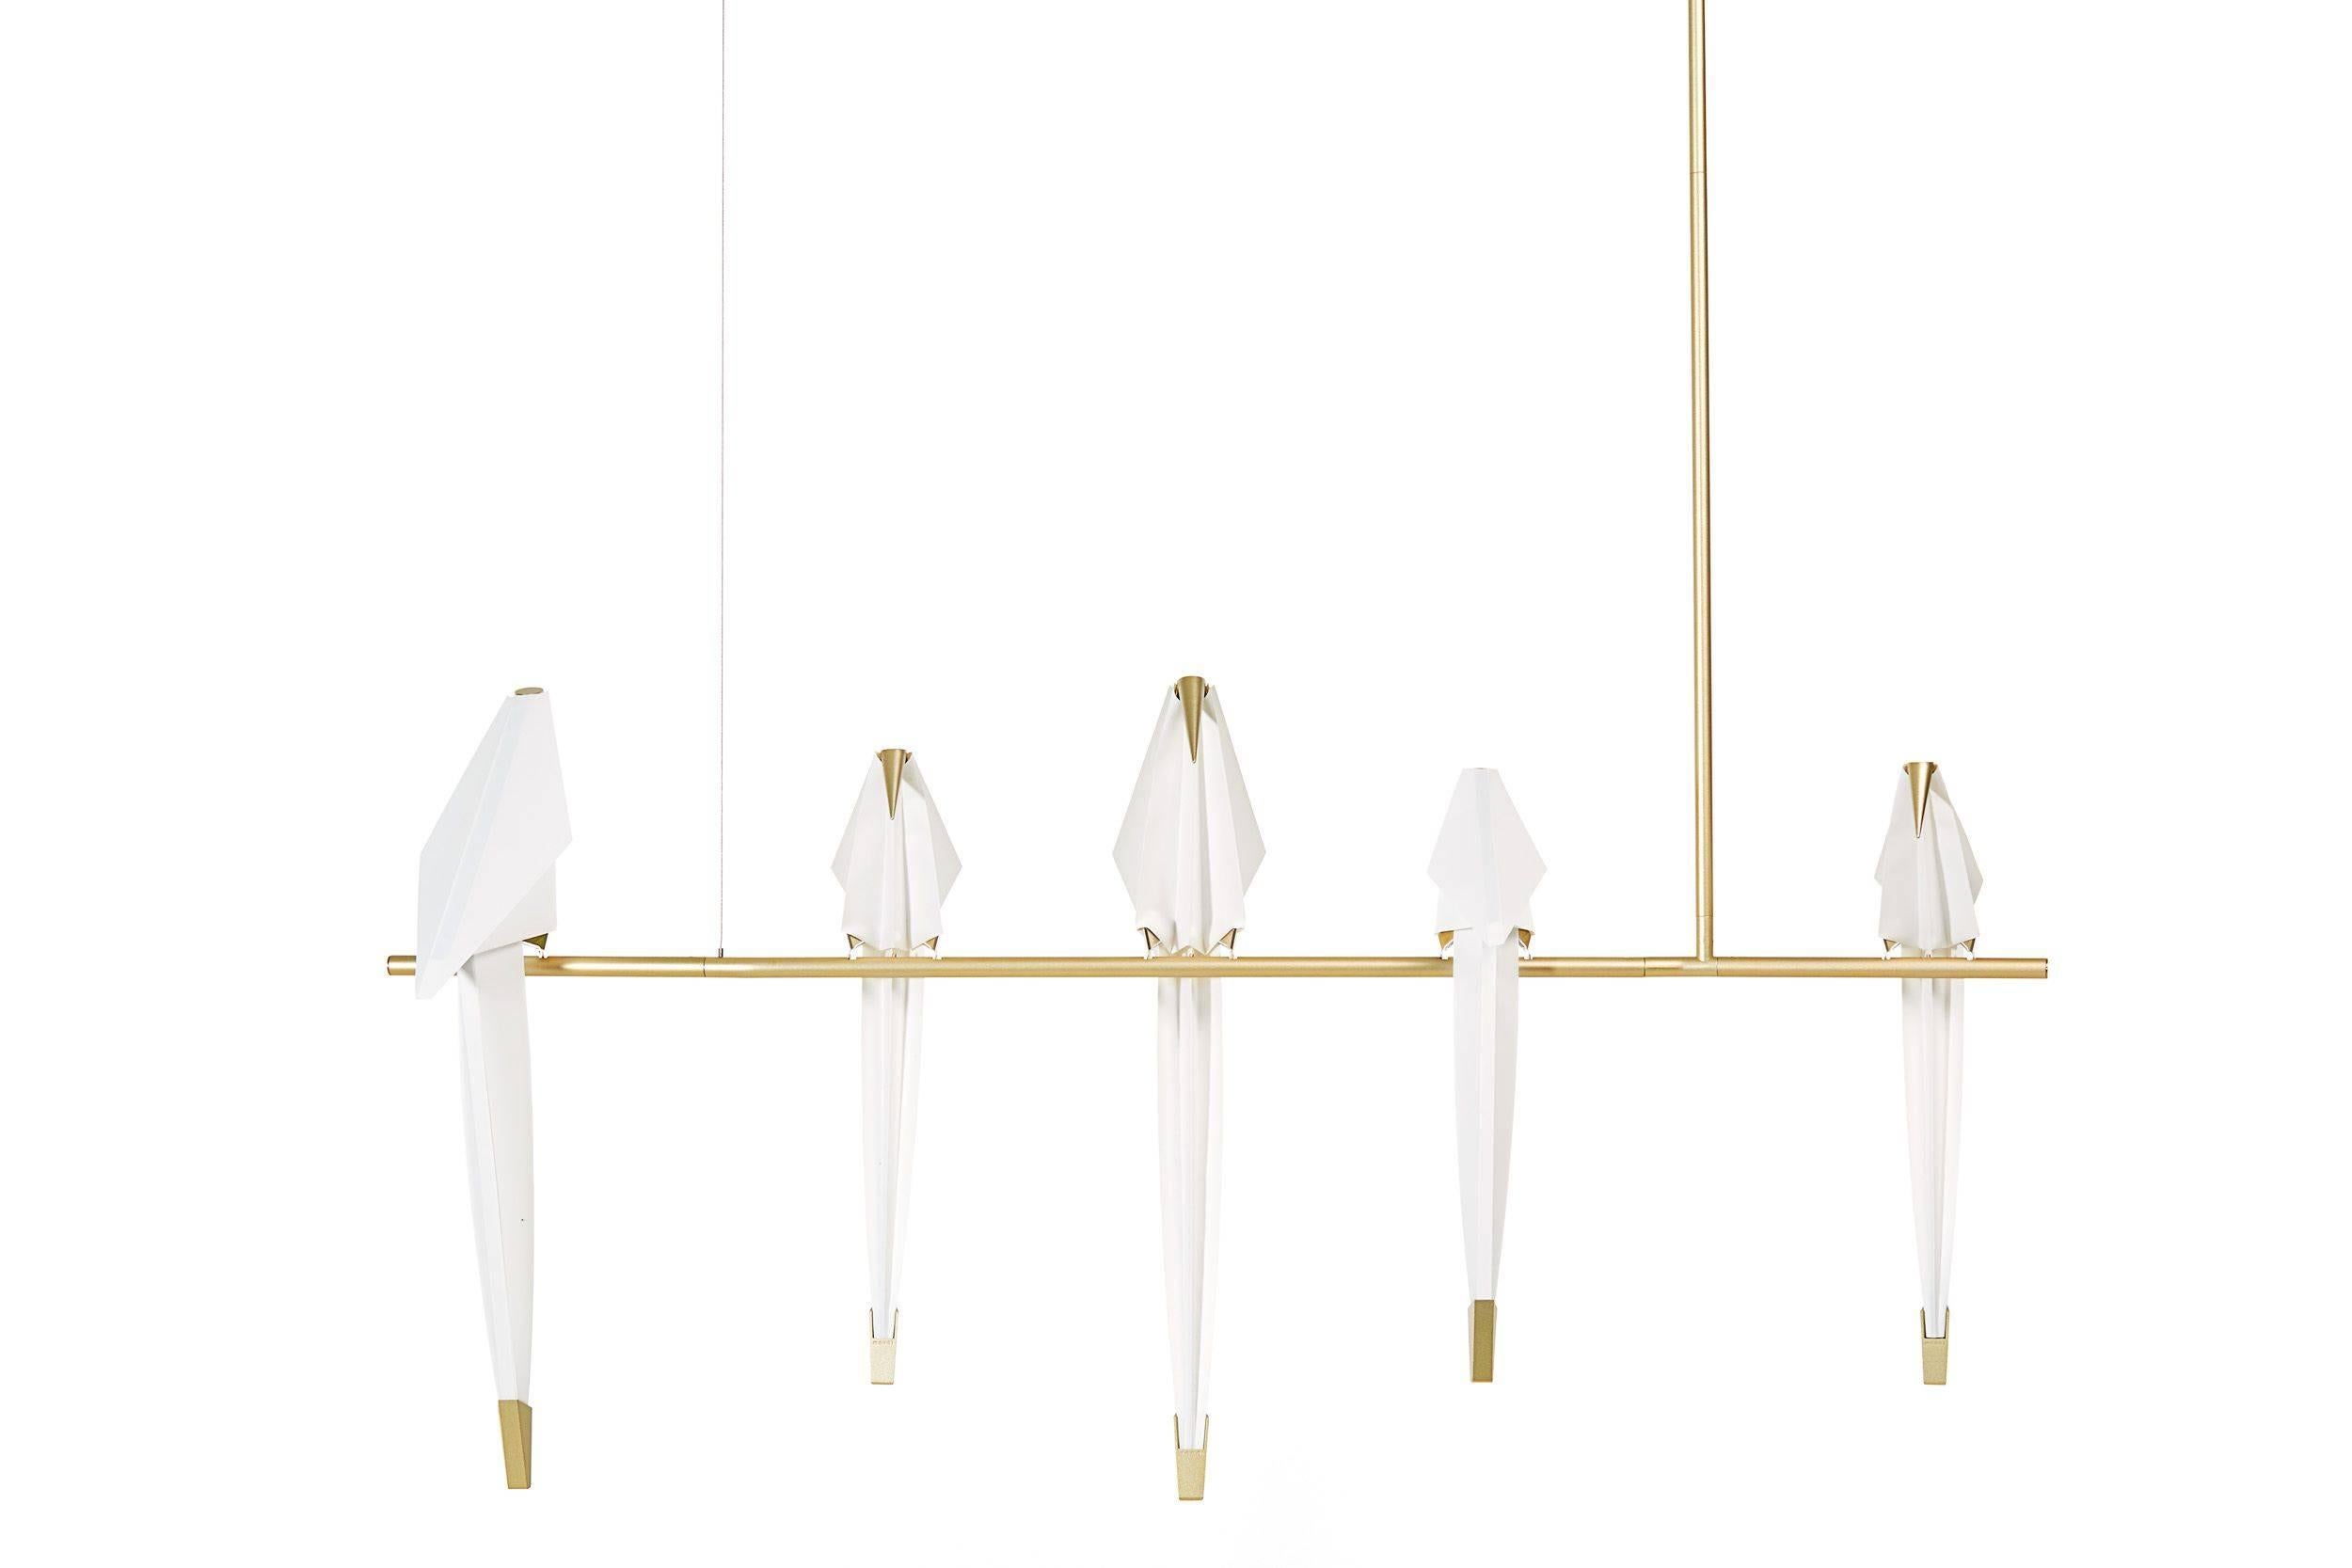 Perch light branch.  
Moooi Perch Light Branch Chandelier with LED bulbs.

A bird is gracefully balanced on a tall metal perch, beautiful and proud, a swinging glimmer of warm light. Yet you are inside, after daylight has faded, under the spell of